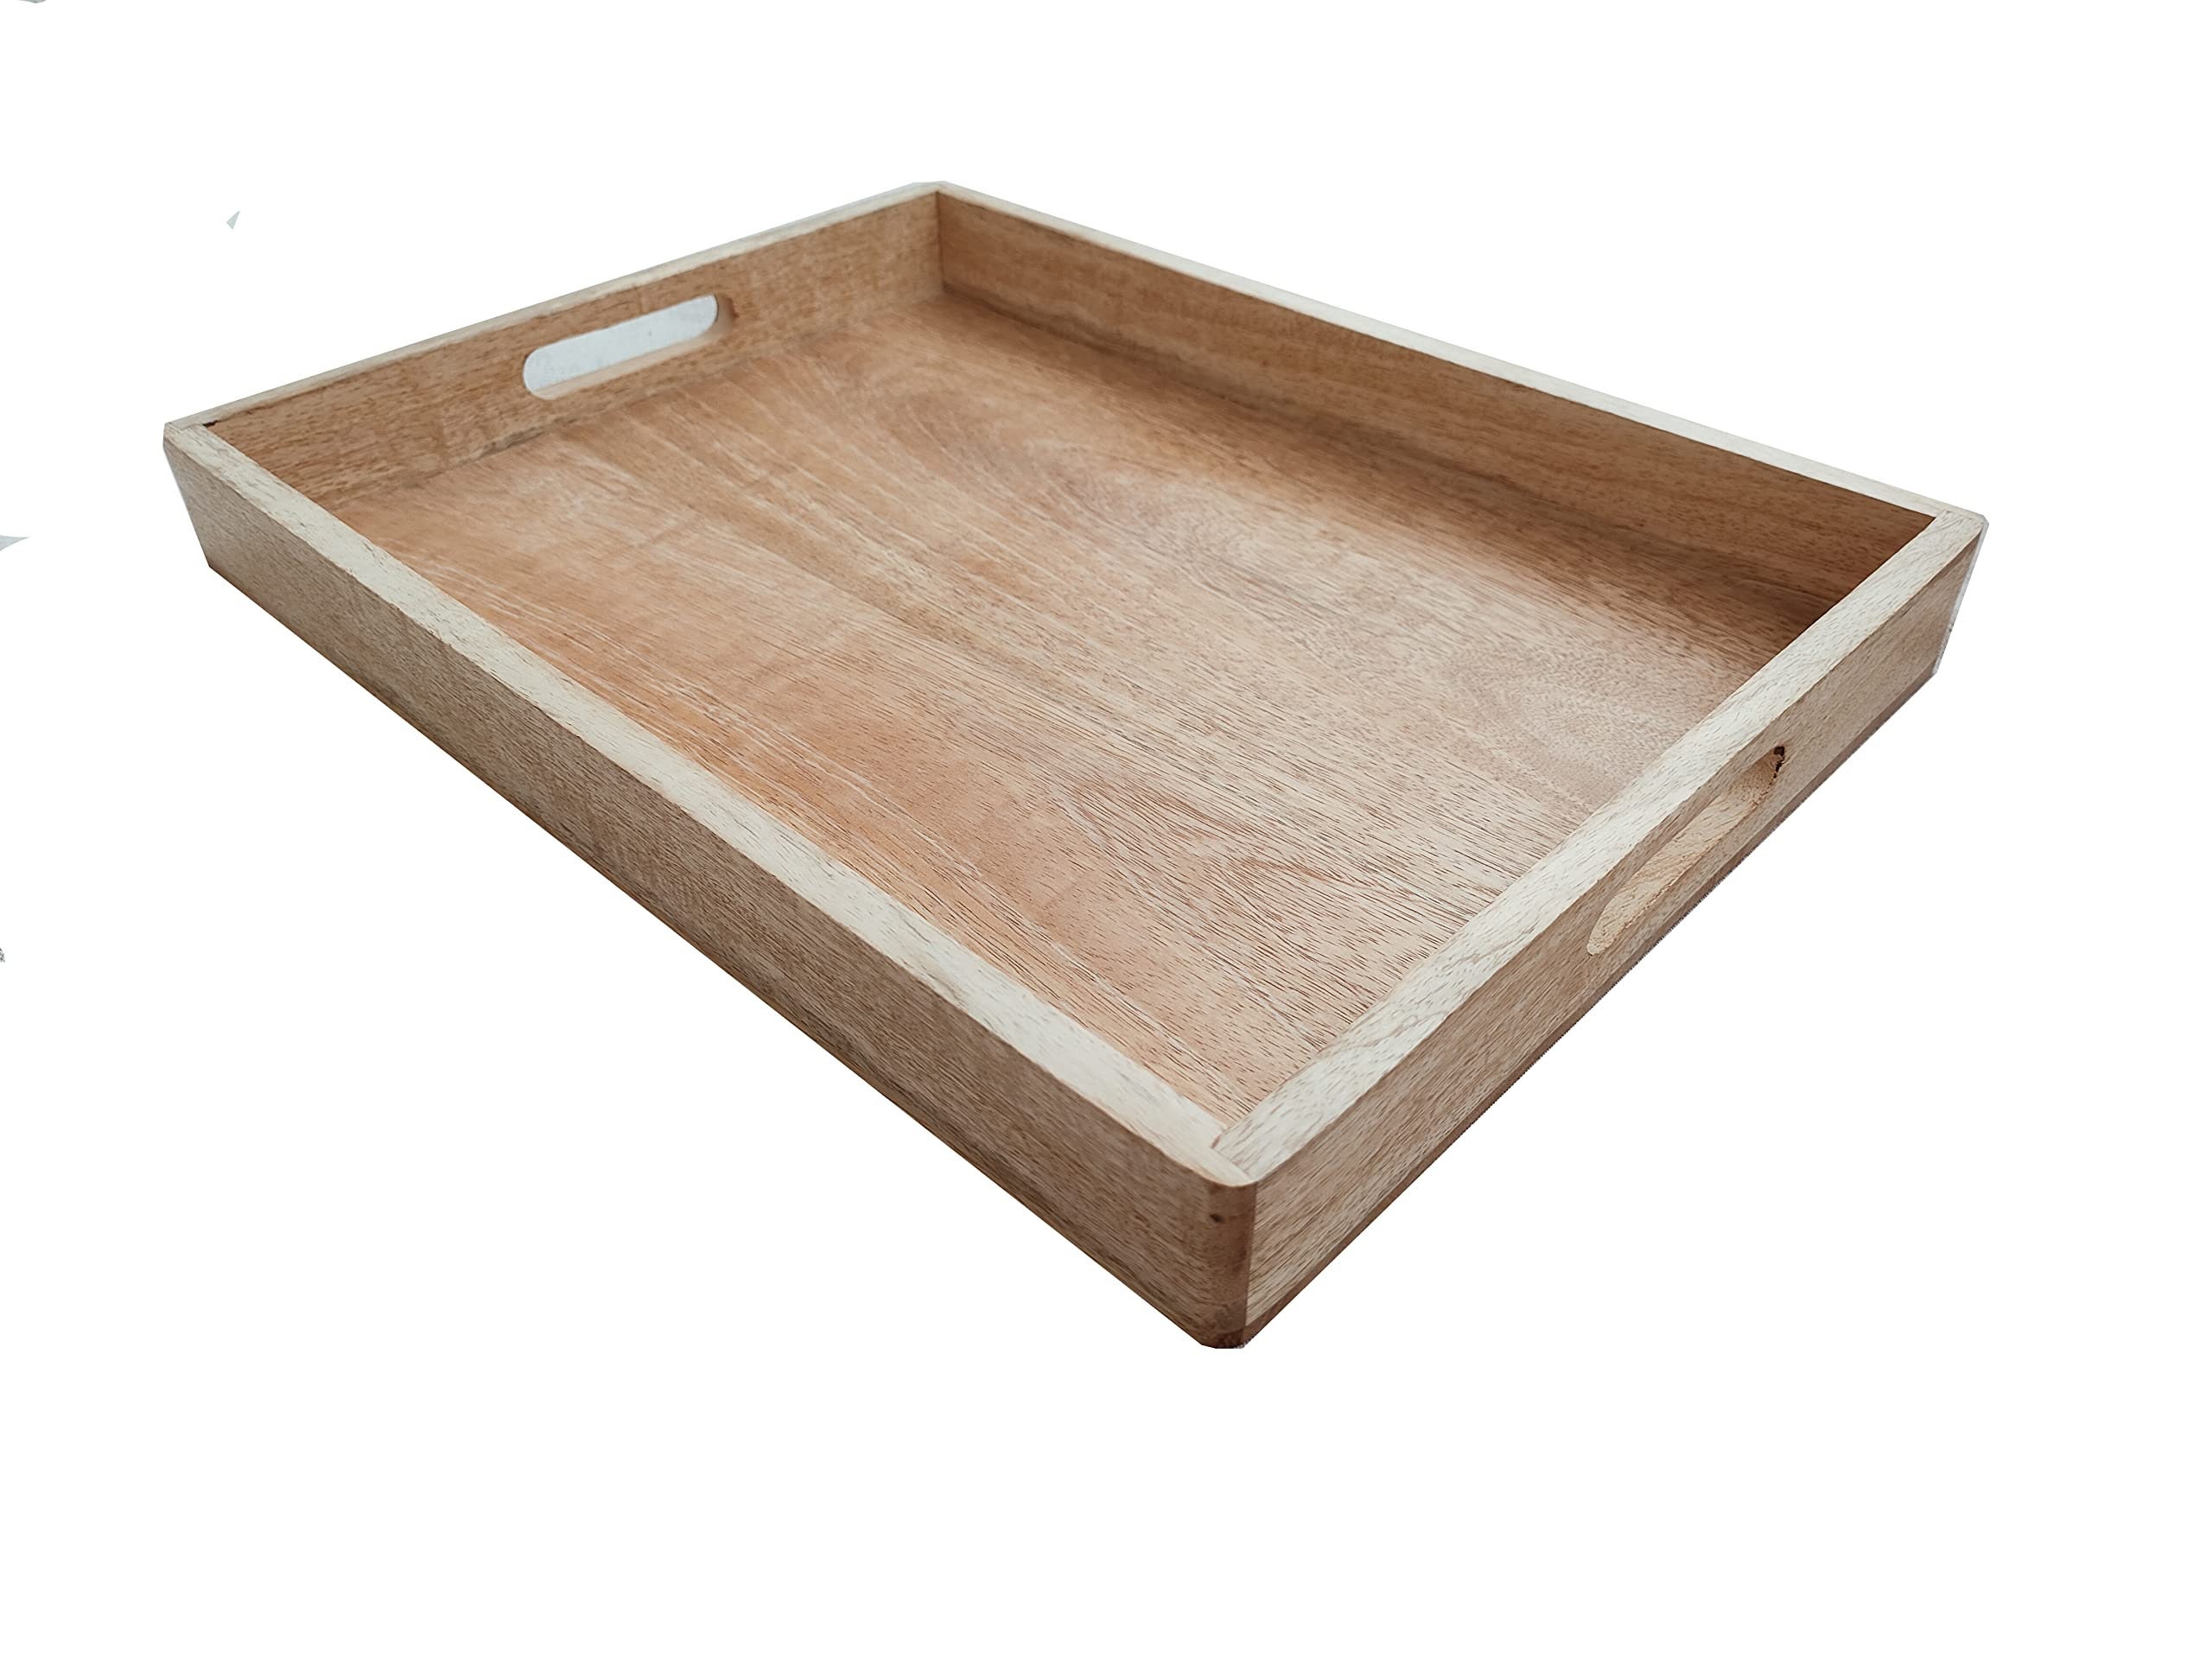 20''x15'', Breakfast Tray, Unfinished Wood Tray 